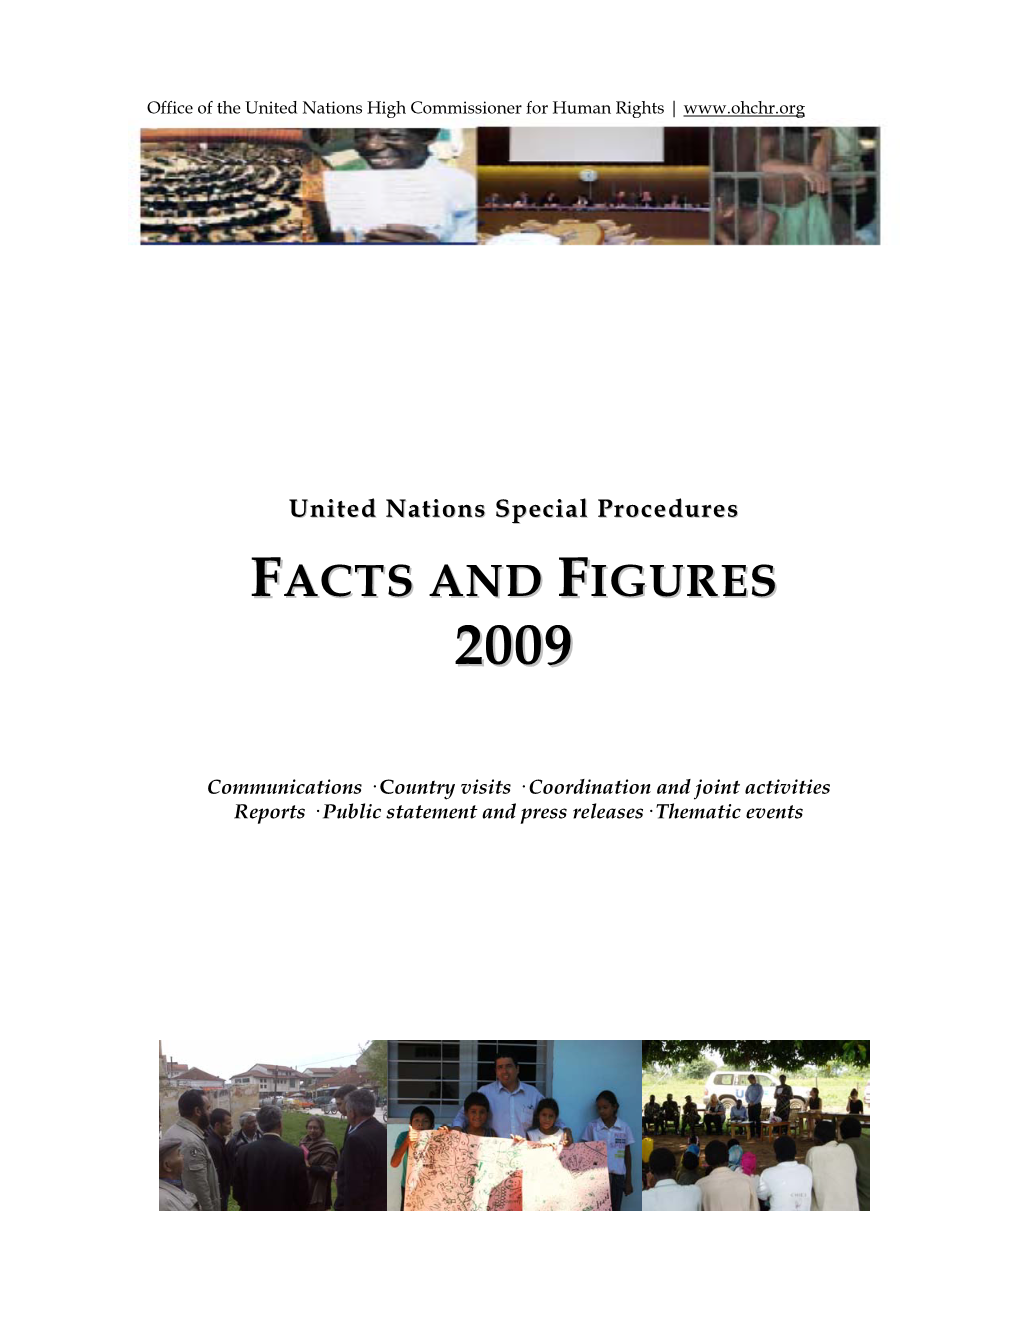 Facts and Figures 2009